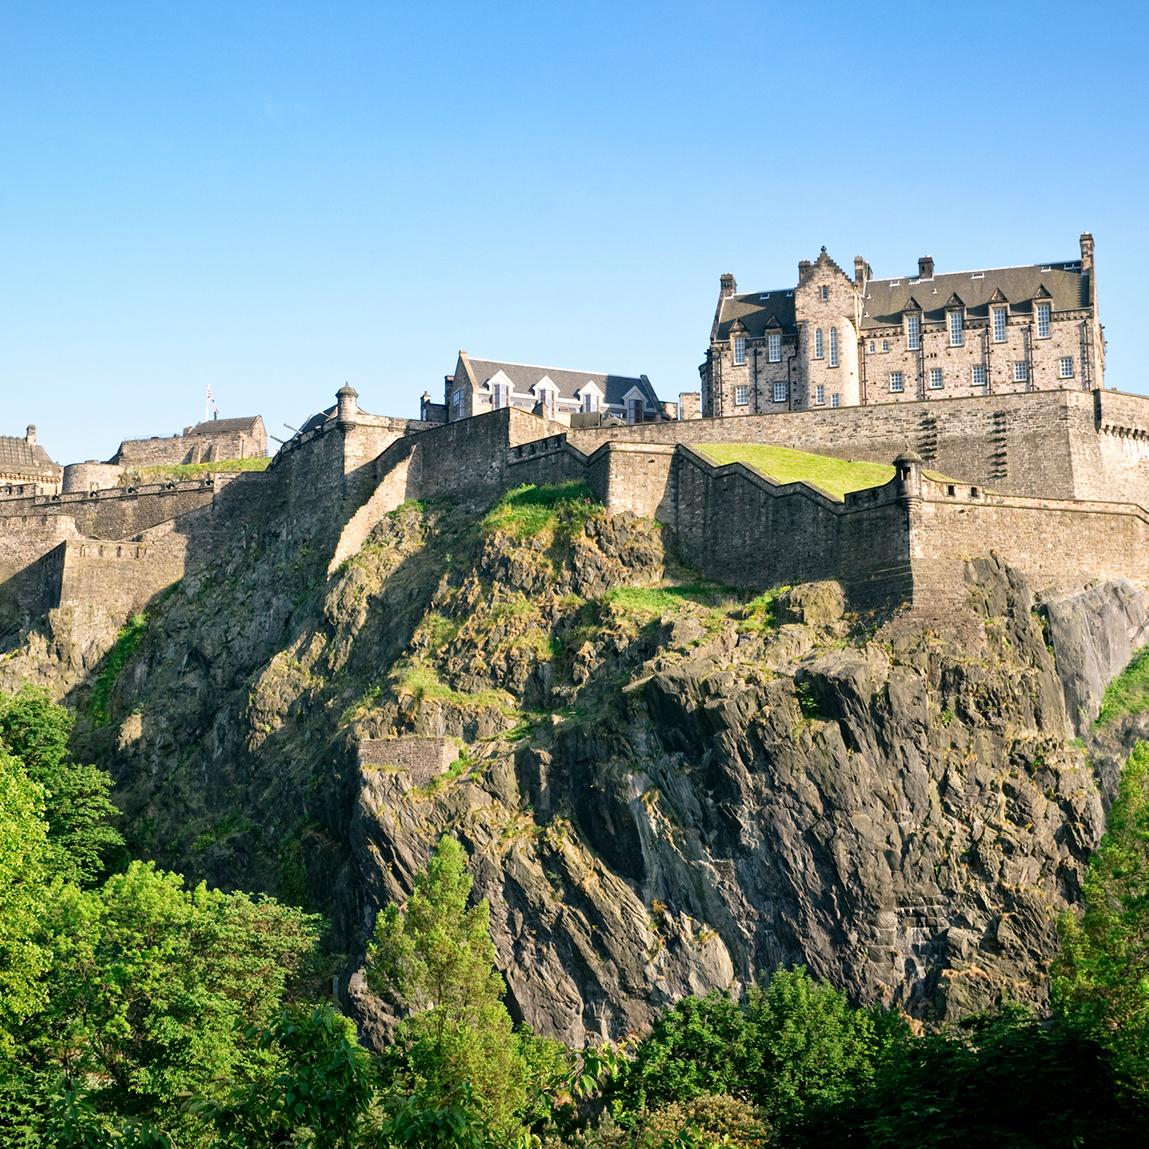 Views of cliffside castles and palaces in Edinburgh Scotland